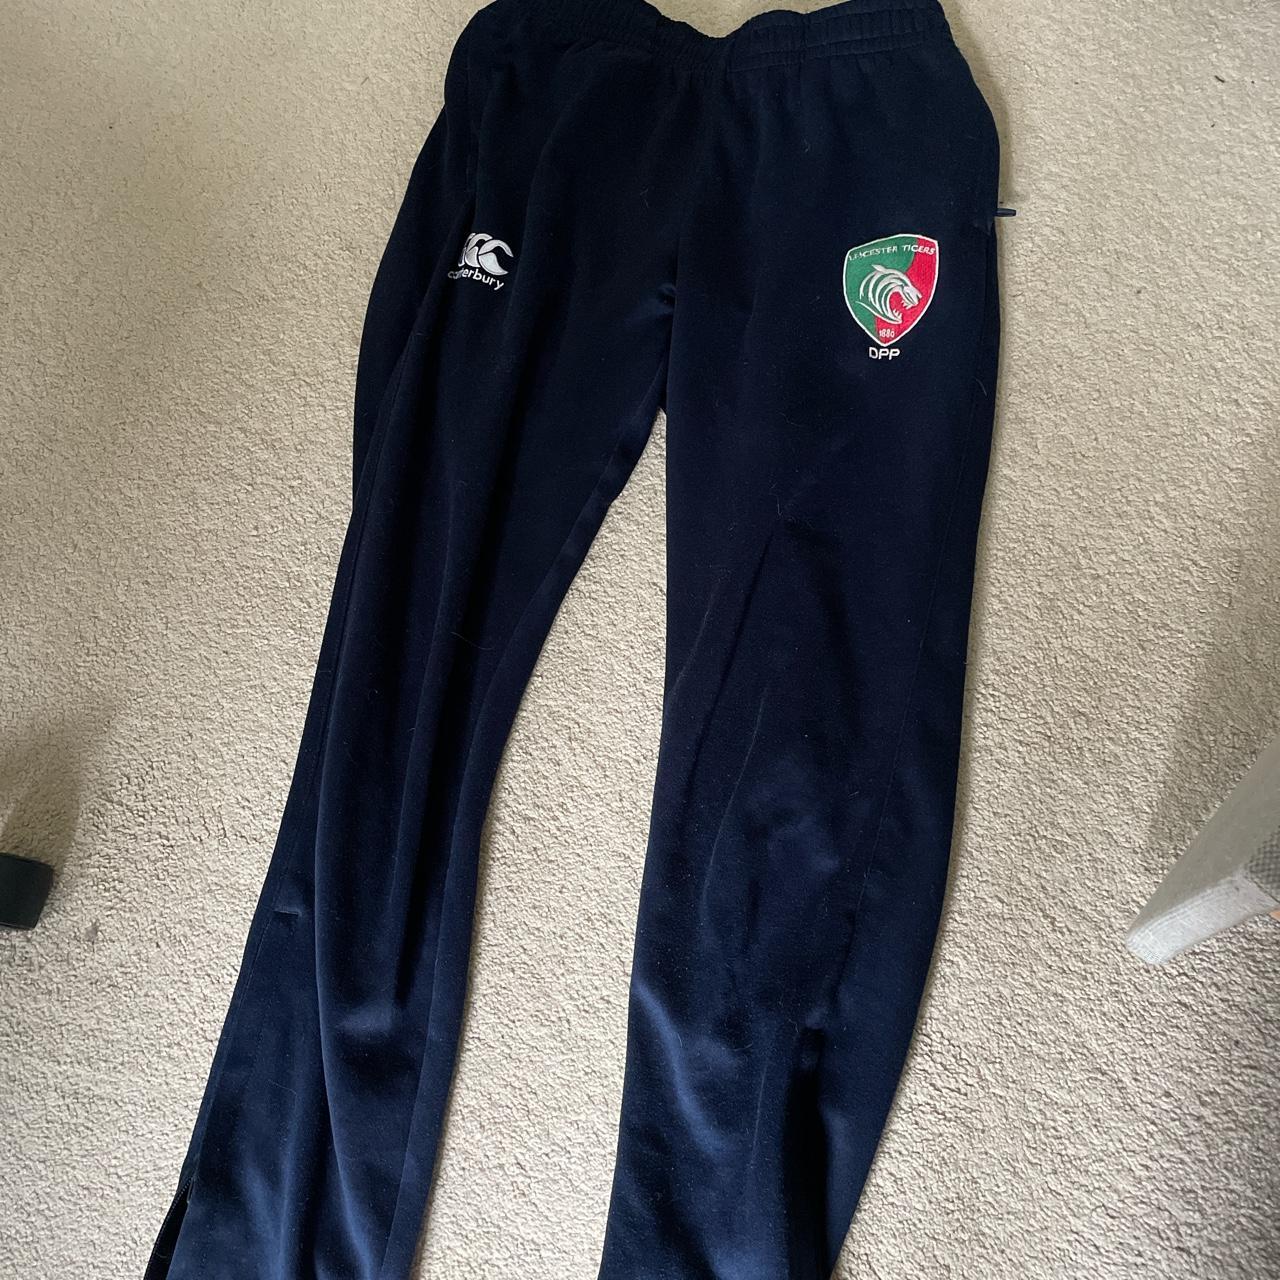 Canterbury / Leicester Tigers joggers Worn quite a... - Depop